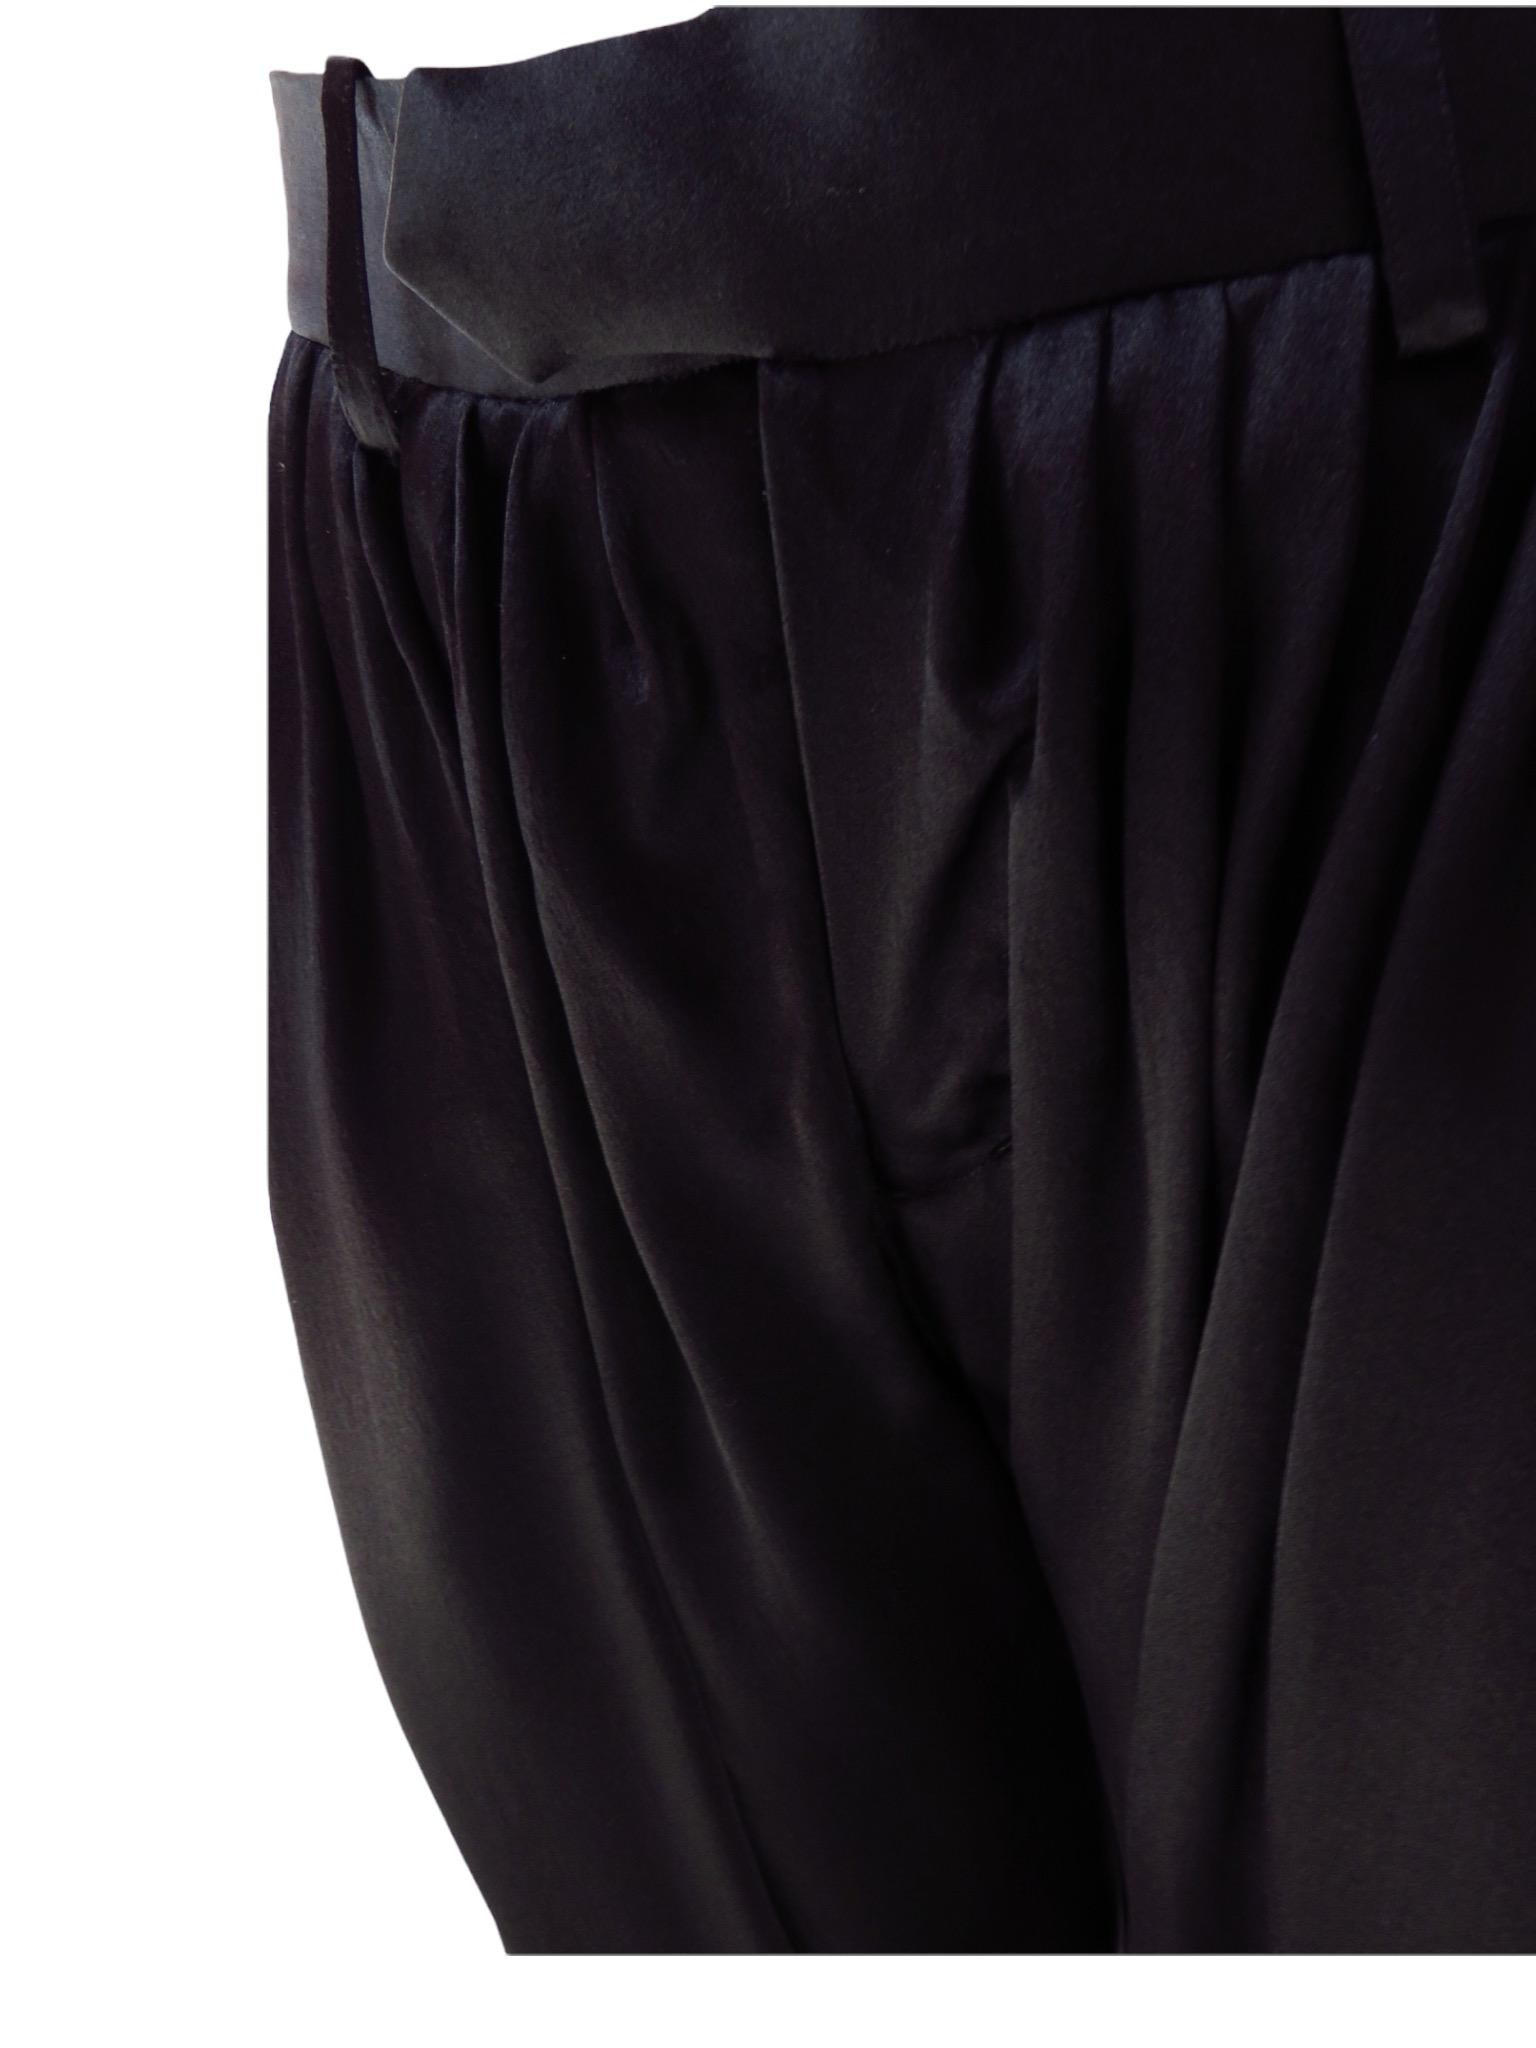 Undercover Black Pleated Silk Harem Pants For Sale 2